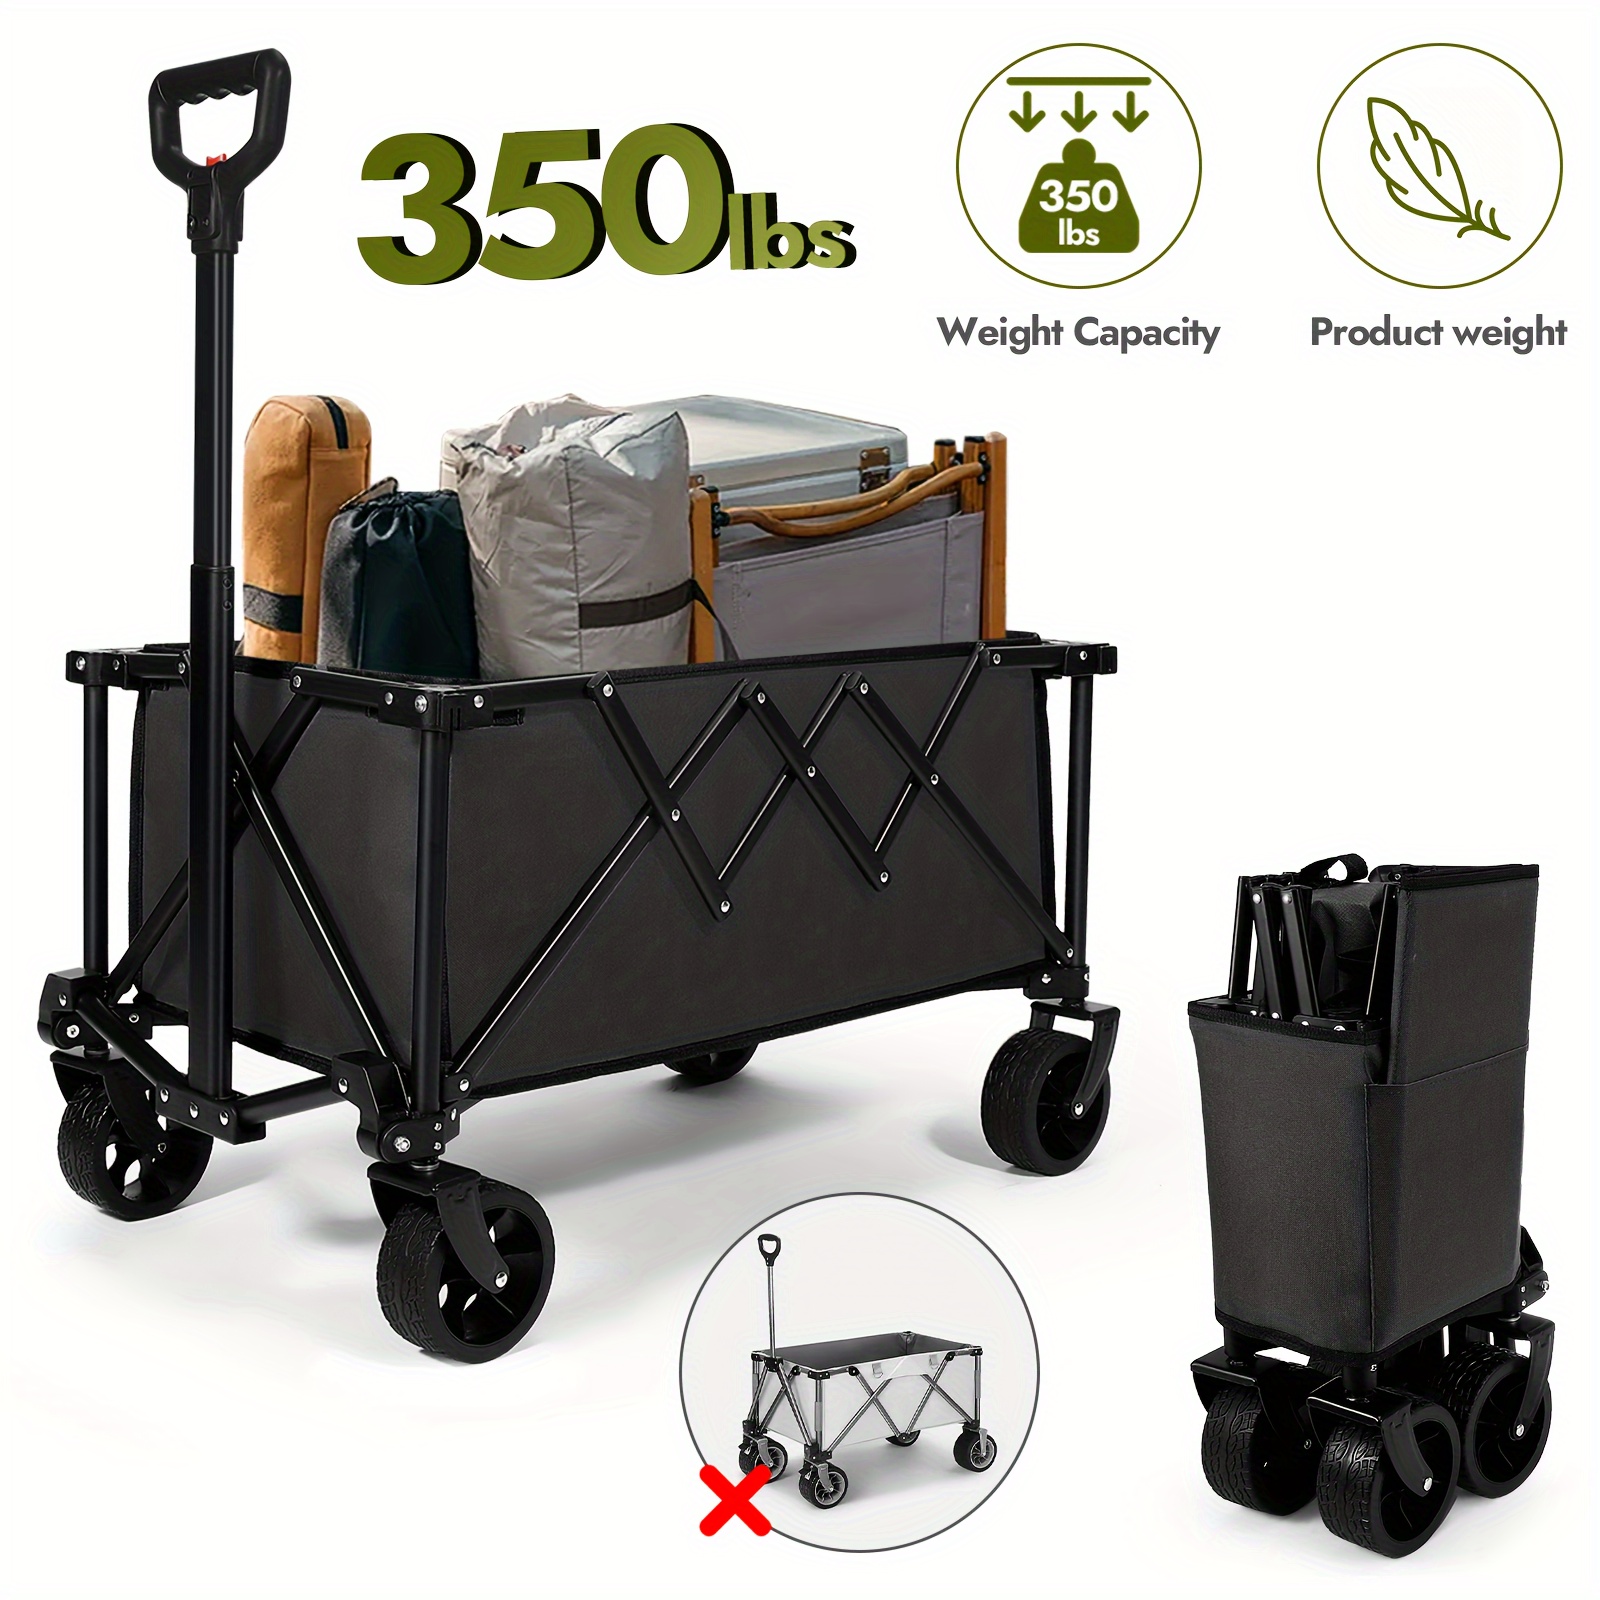 

1pc Beach Wagon Cart 3 Colors Foldable Fabric Travel Cart, Heavy Duty Utility Collapsible Wagon With All-terrain Wheels, Portable Beach Wagon, Load Capacity 200 Lbs For Shopping, Camping